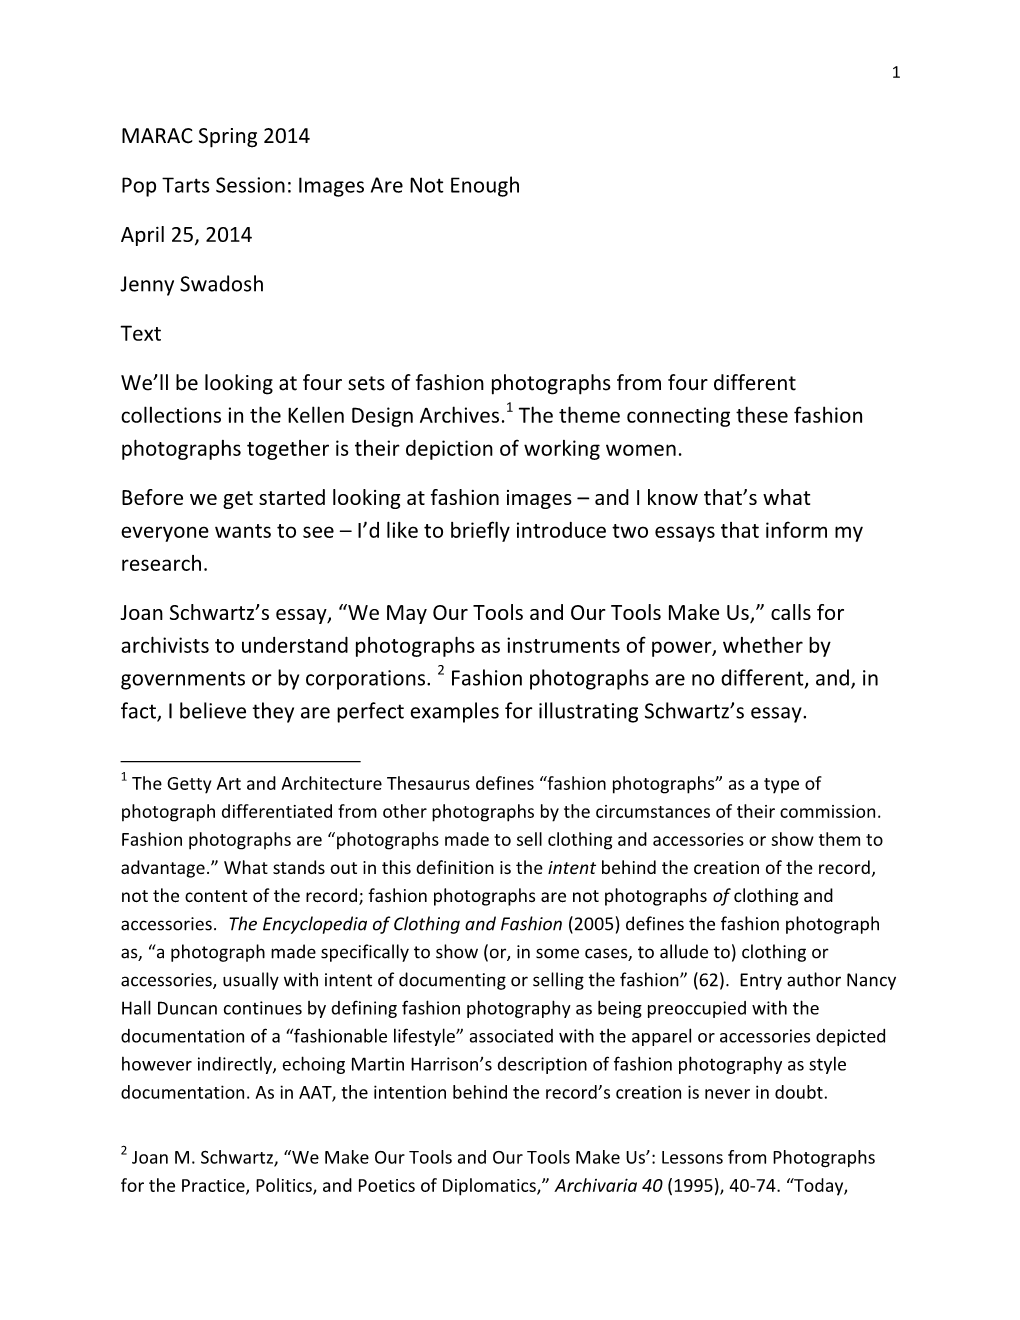 Images Are Not Enough April 25, 2014 Jenny Swadosh Text We'll